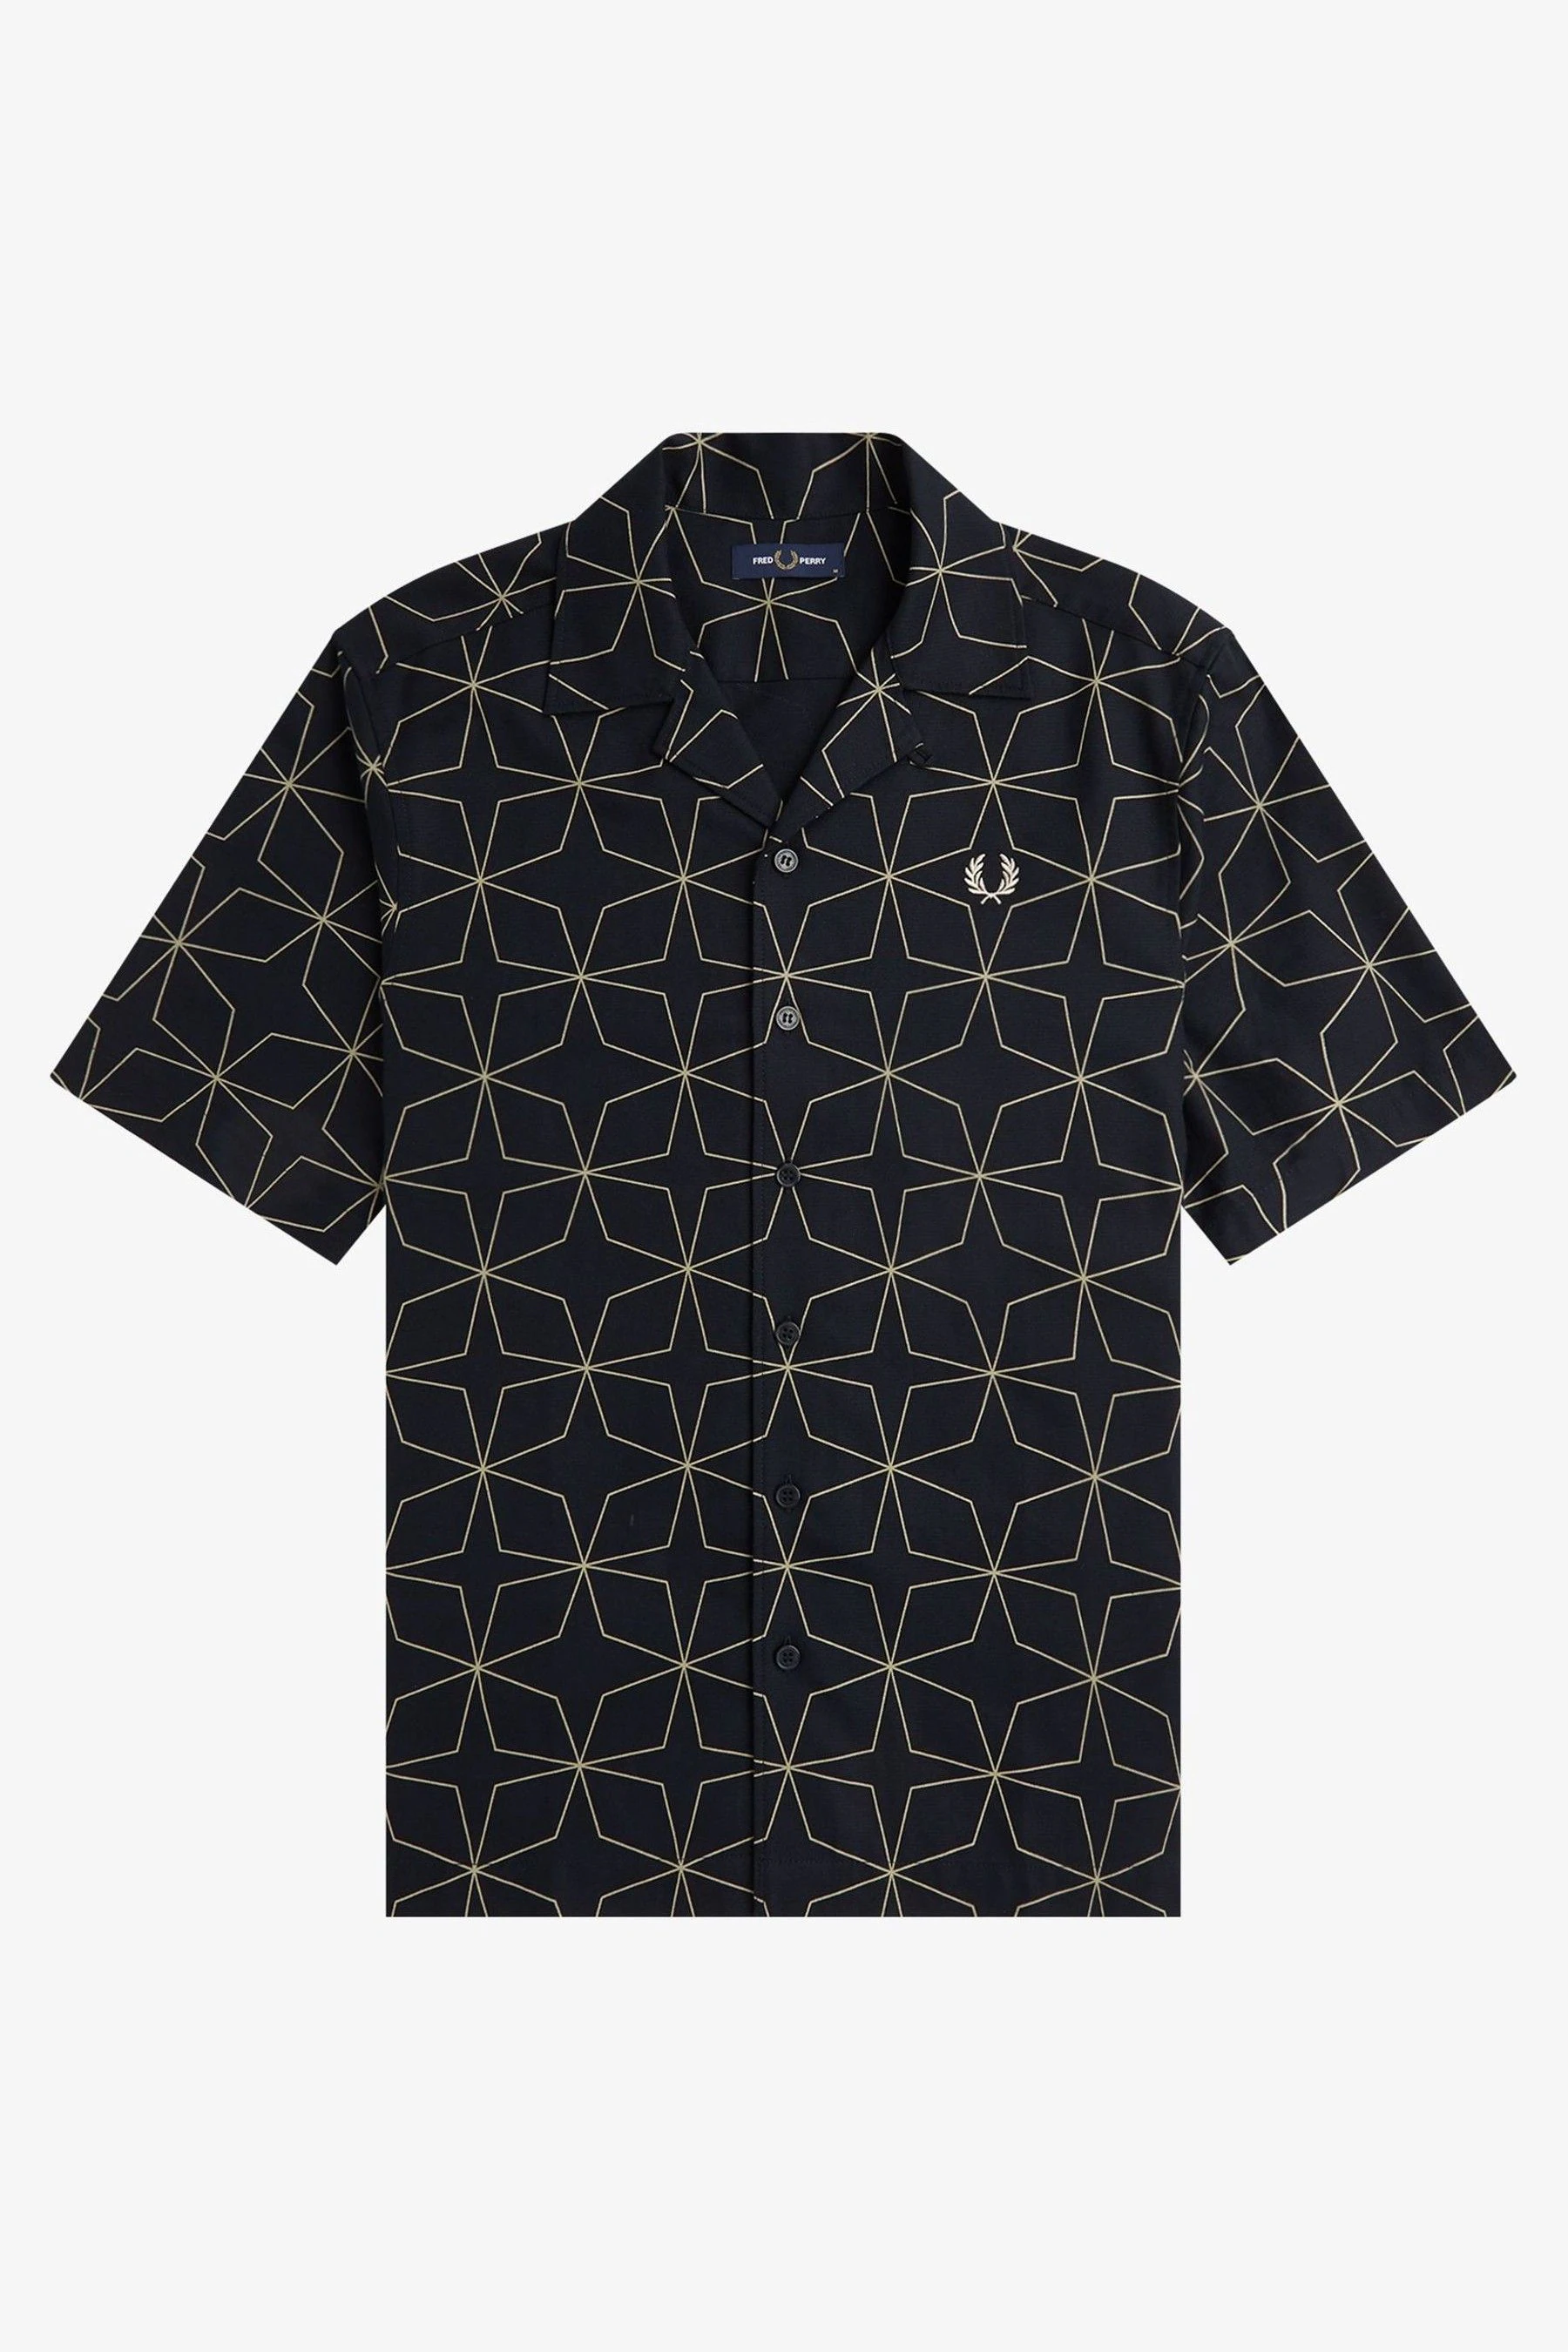 Fred Perry Geometric Print Revere Collar in Black